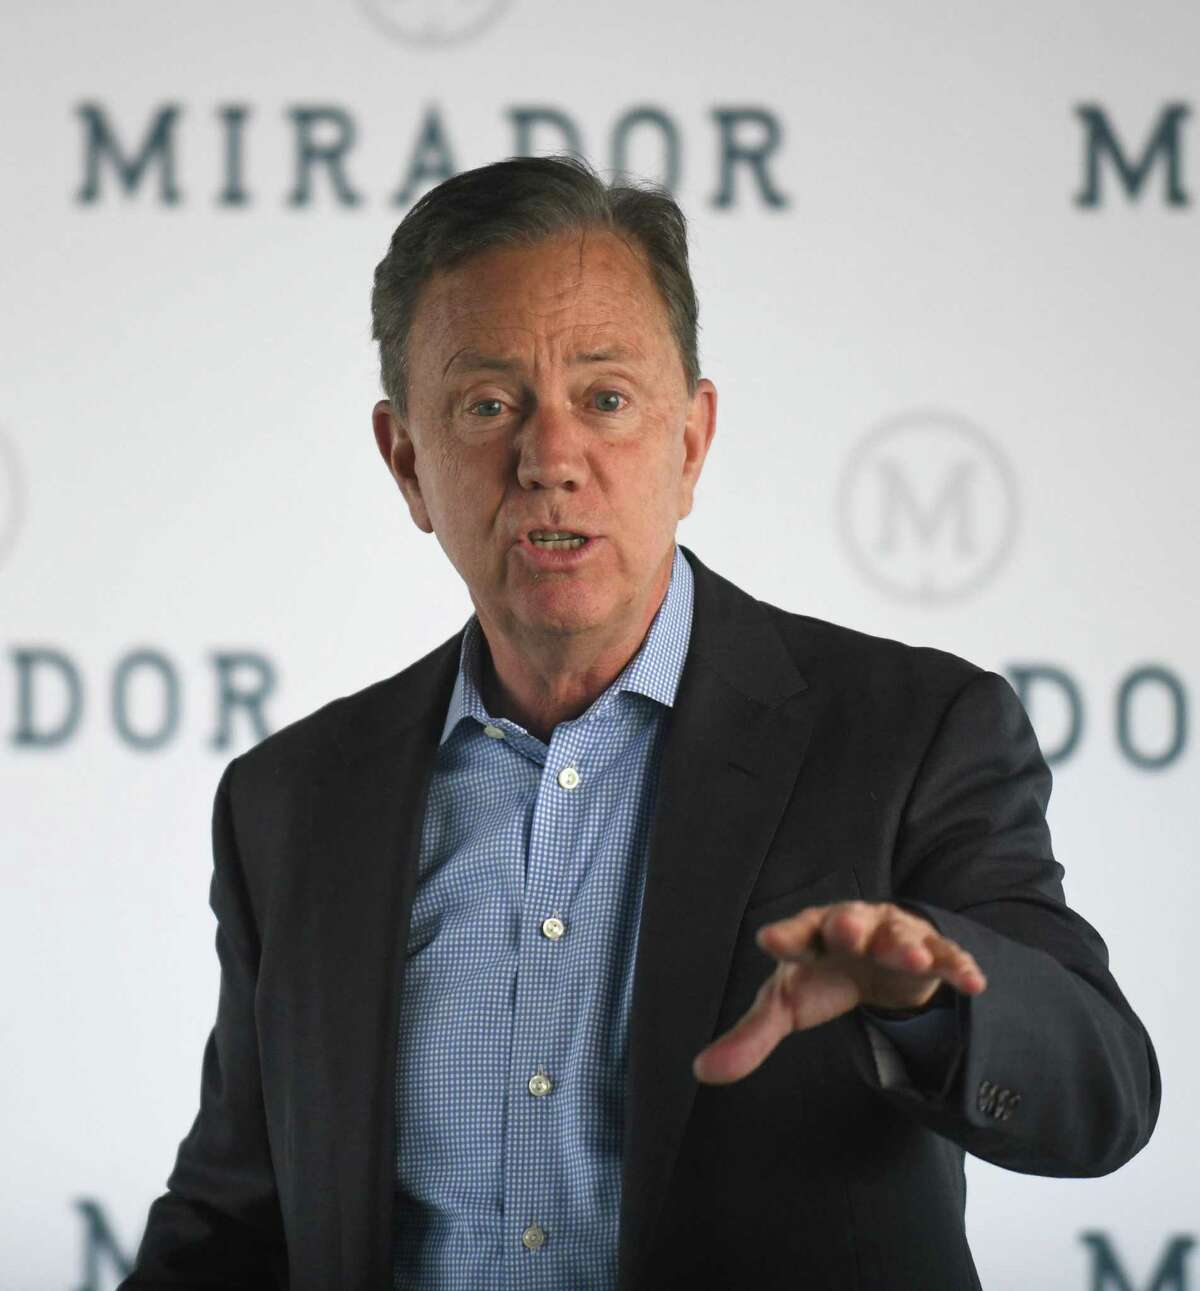 Connecticut Gov. Ned Lamont speaks at a press conference at the future headquarters of Mirador in Stamford, Conn. Monday, April 25, 2022.